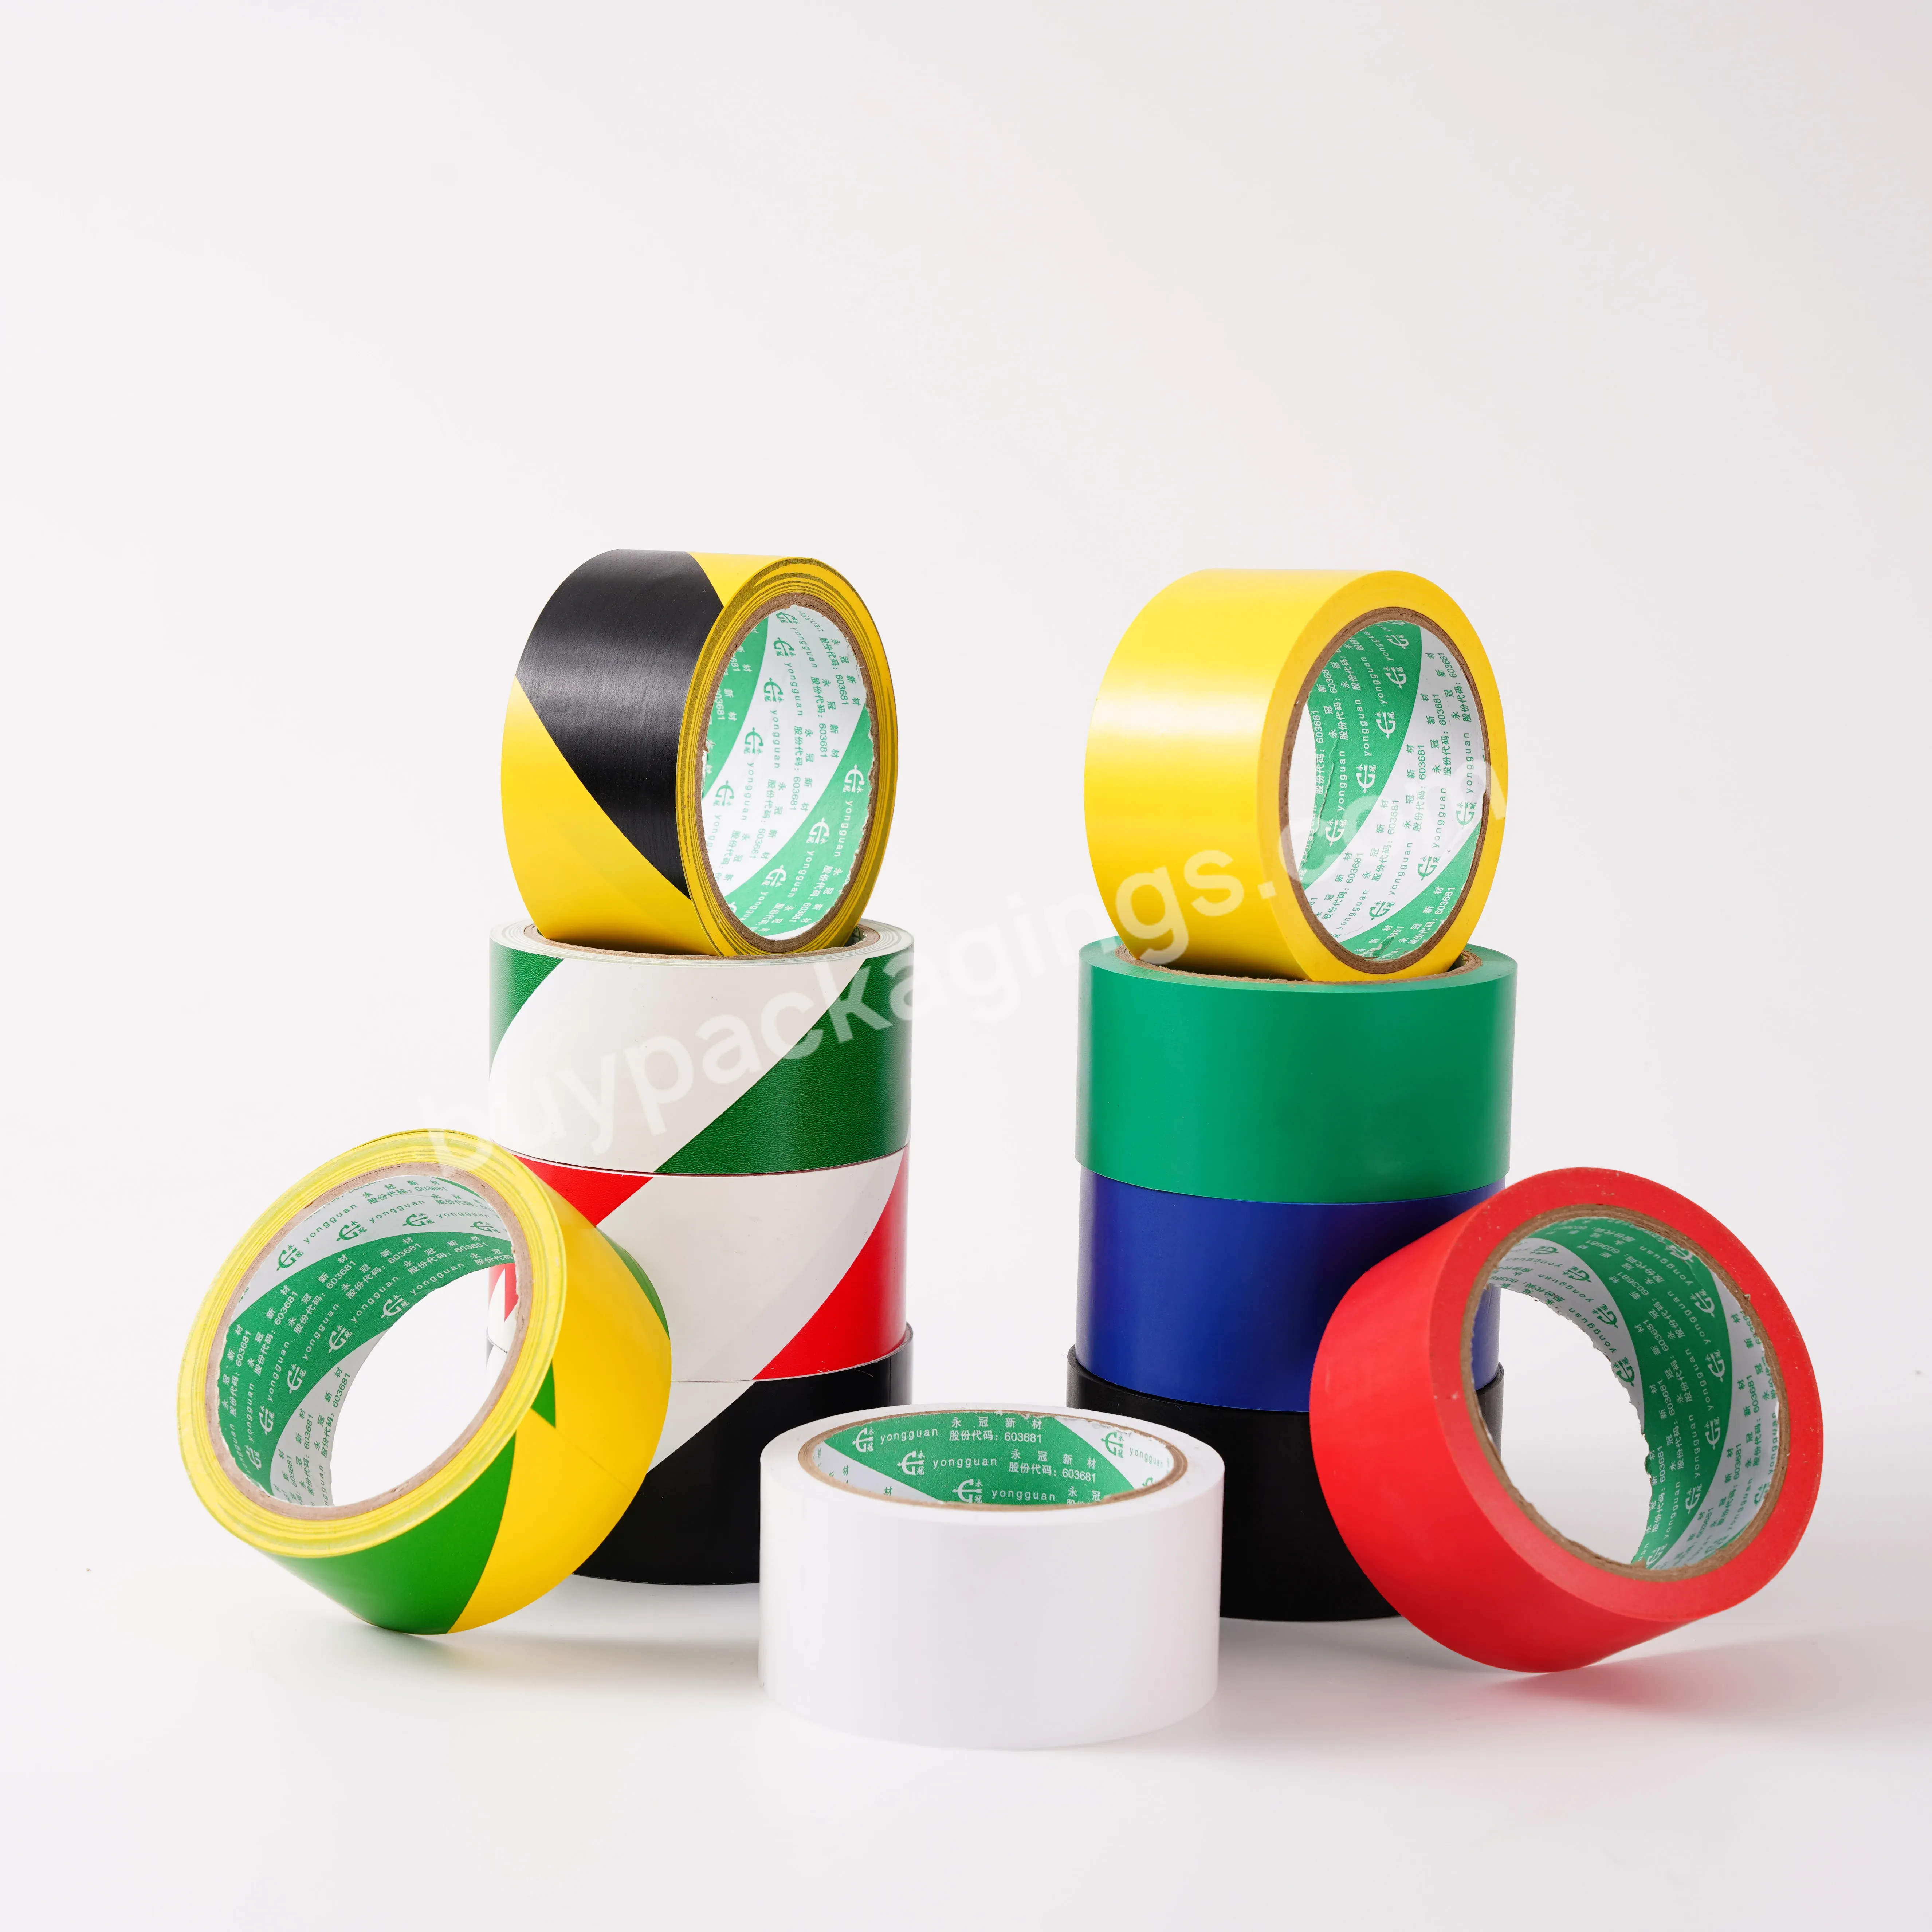 More Quantity,Better Price,Floor Marking And Positioning Pvc Warning Tape - Buy Lane Marking Tape,Safety Mark Duct Warning Tape,Floor Marking Tape.